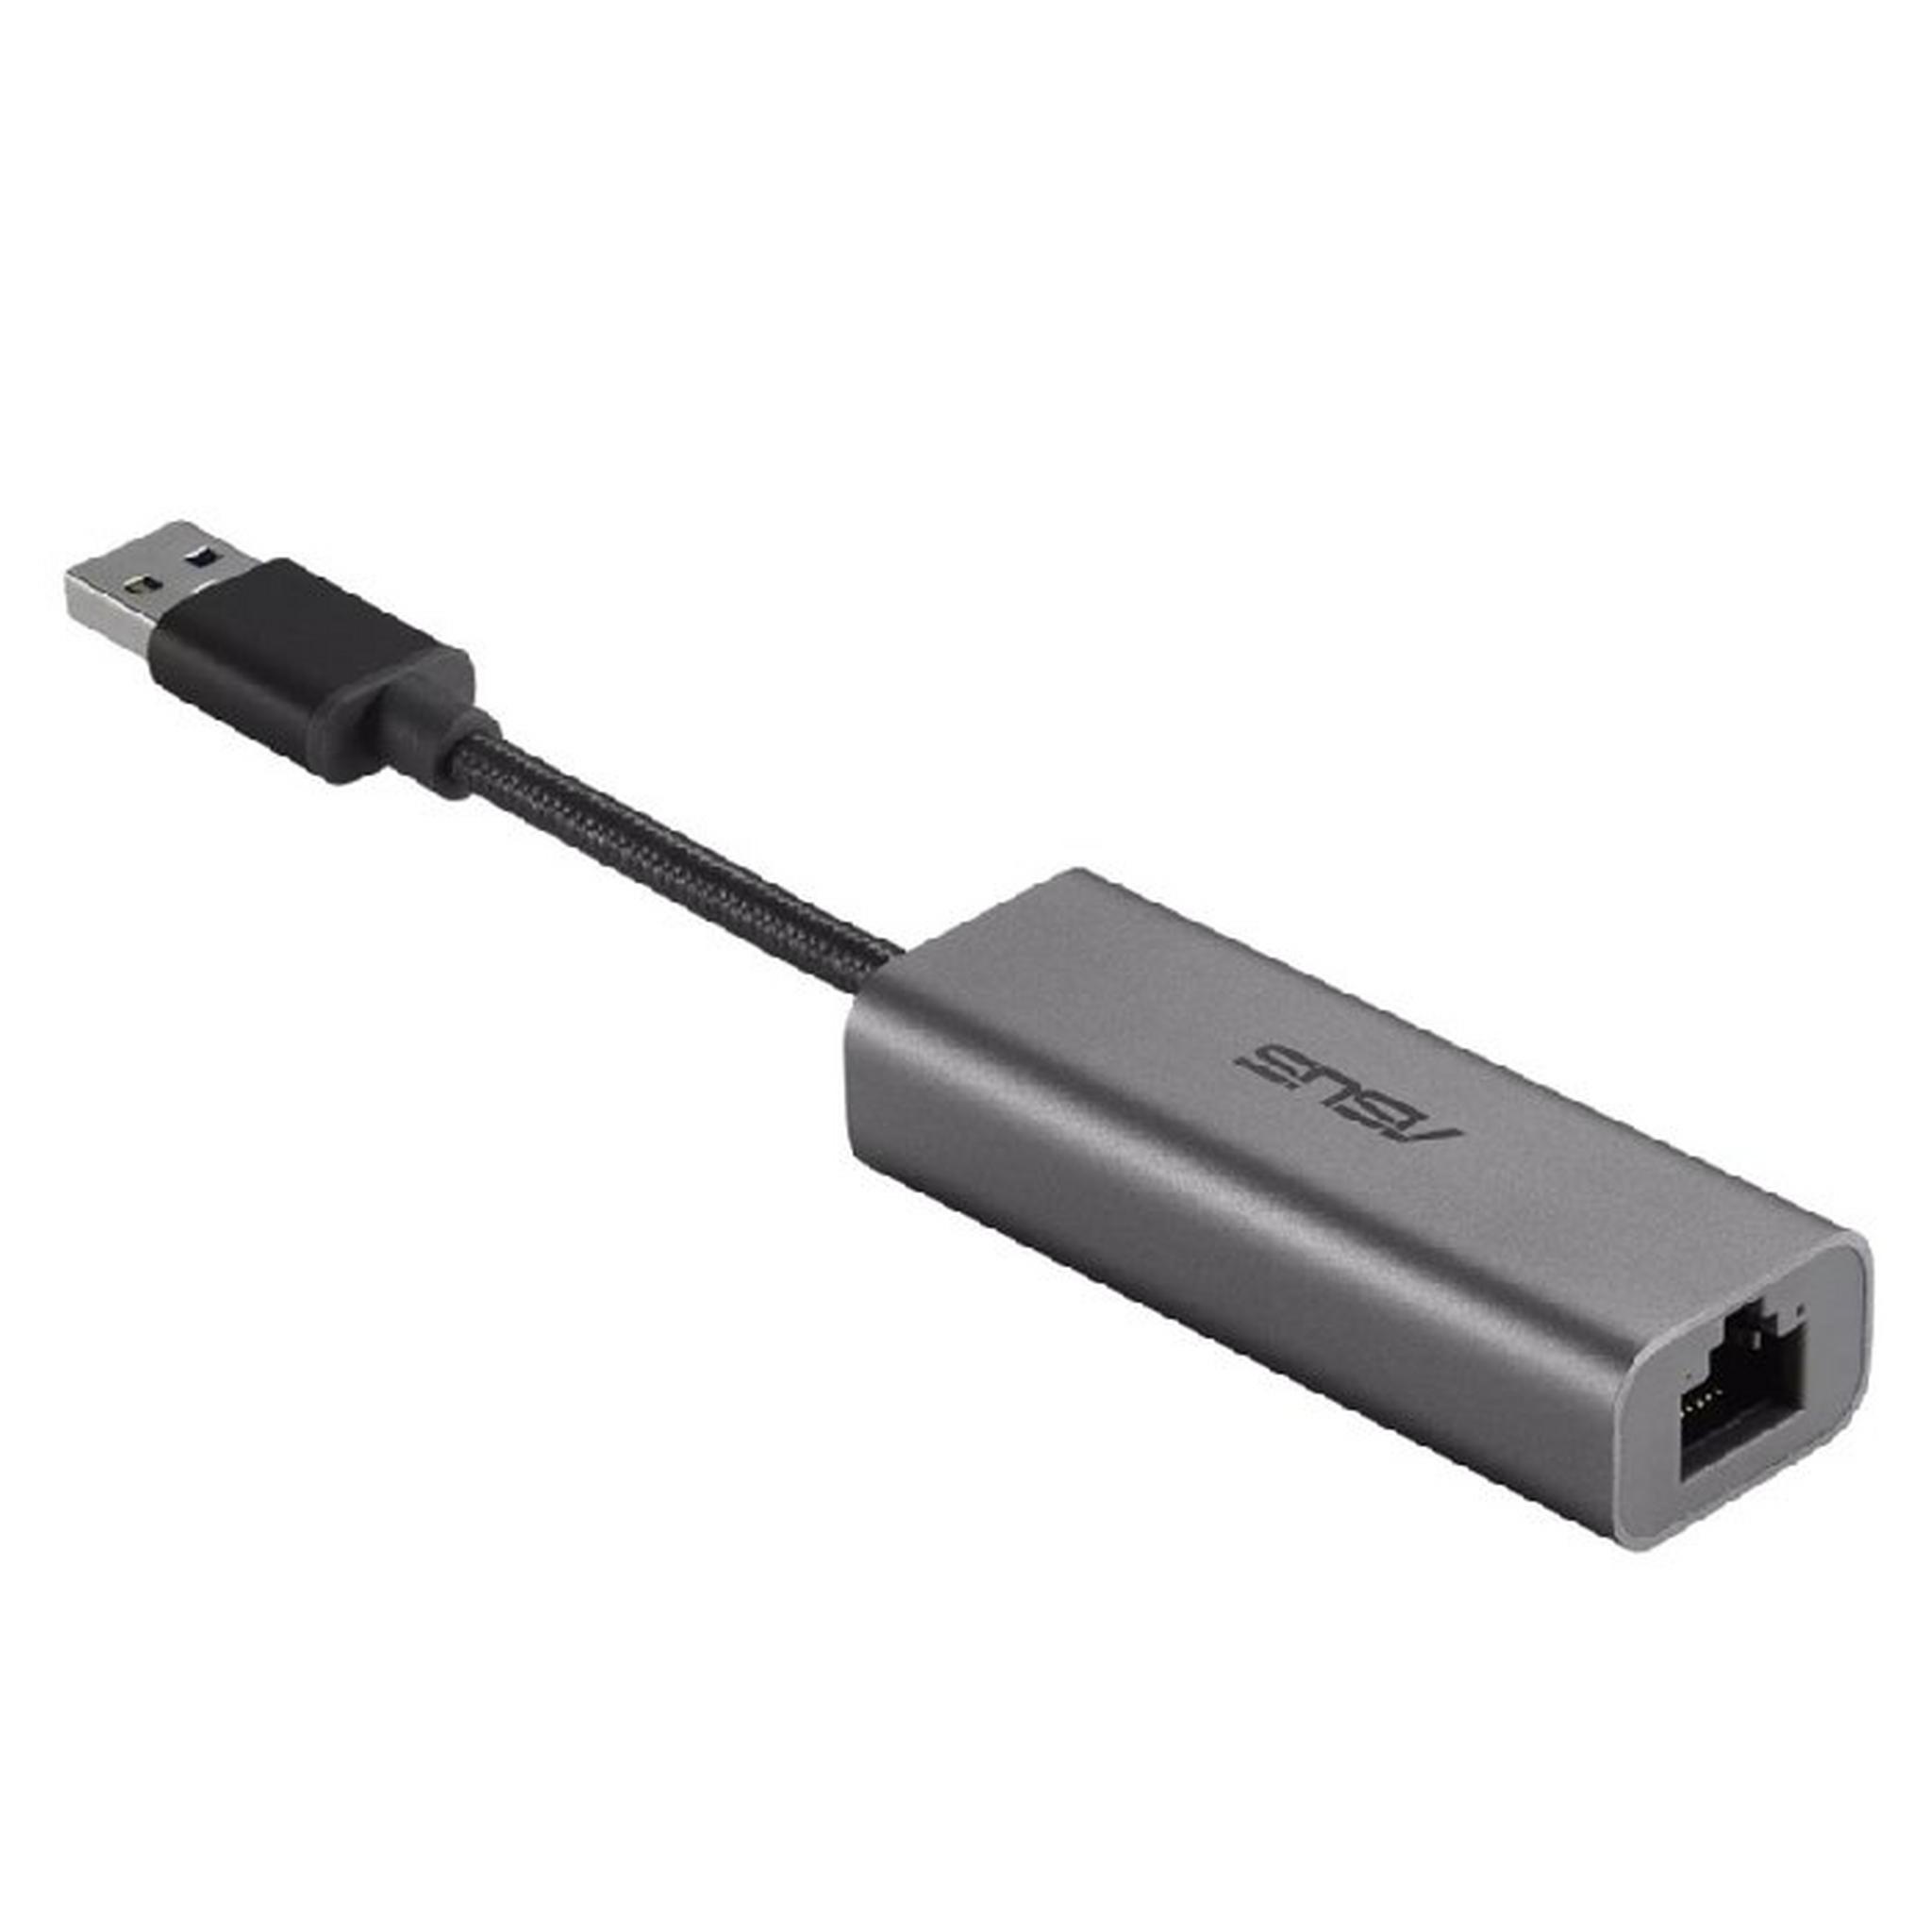 ASUS USB 3.0 Ethernet Adapter, Type-A to 2.5G RJ45 - C2500